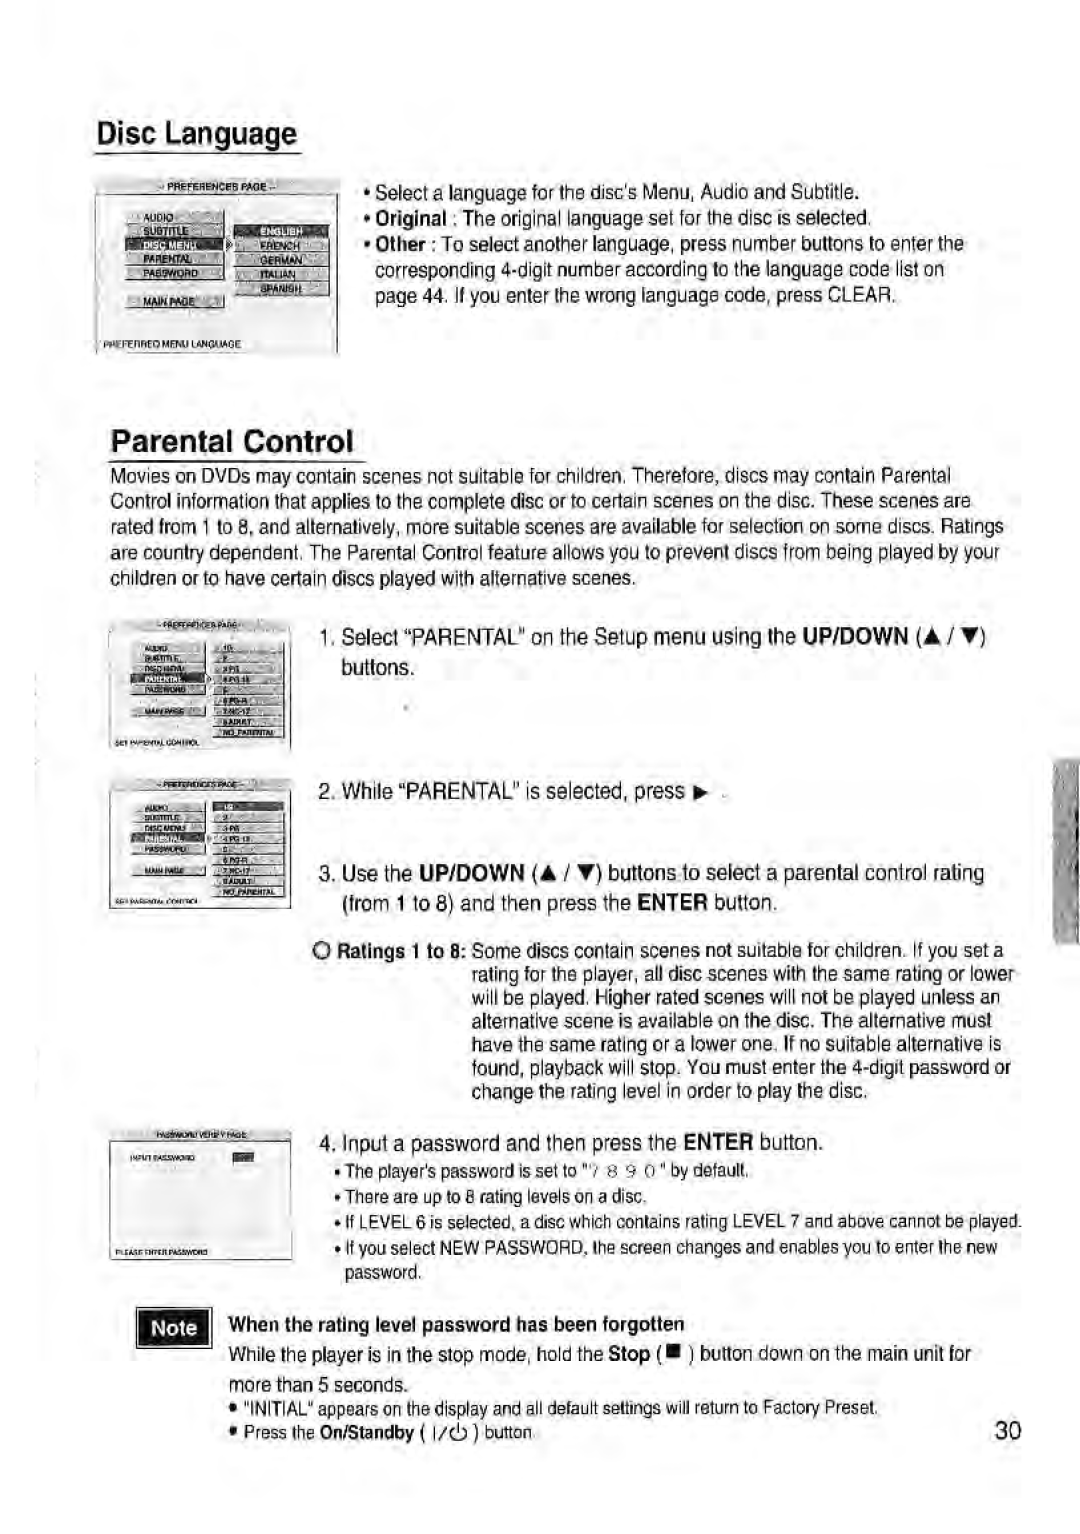 Toshiba SD-43HK owner manual Disc Language, Parental Control, When the rating level password has been forgotten 